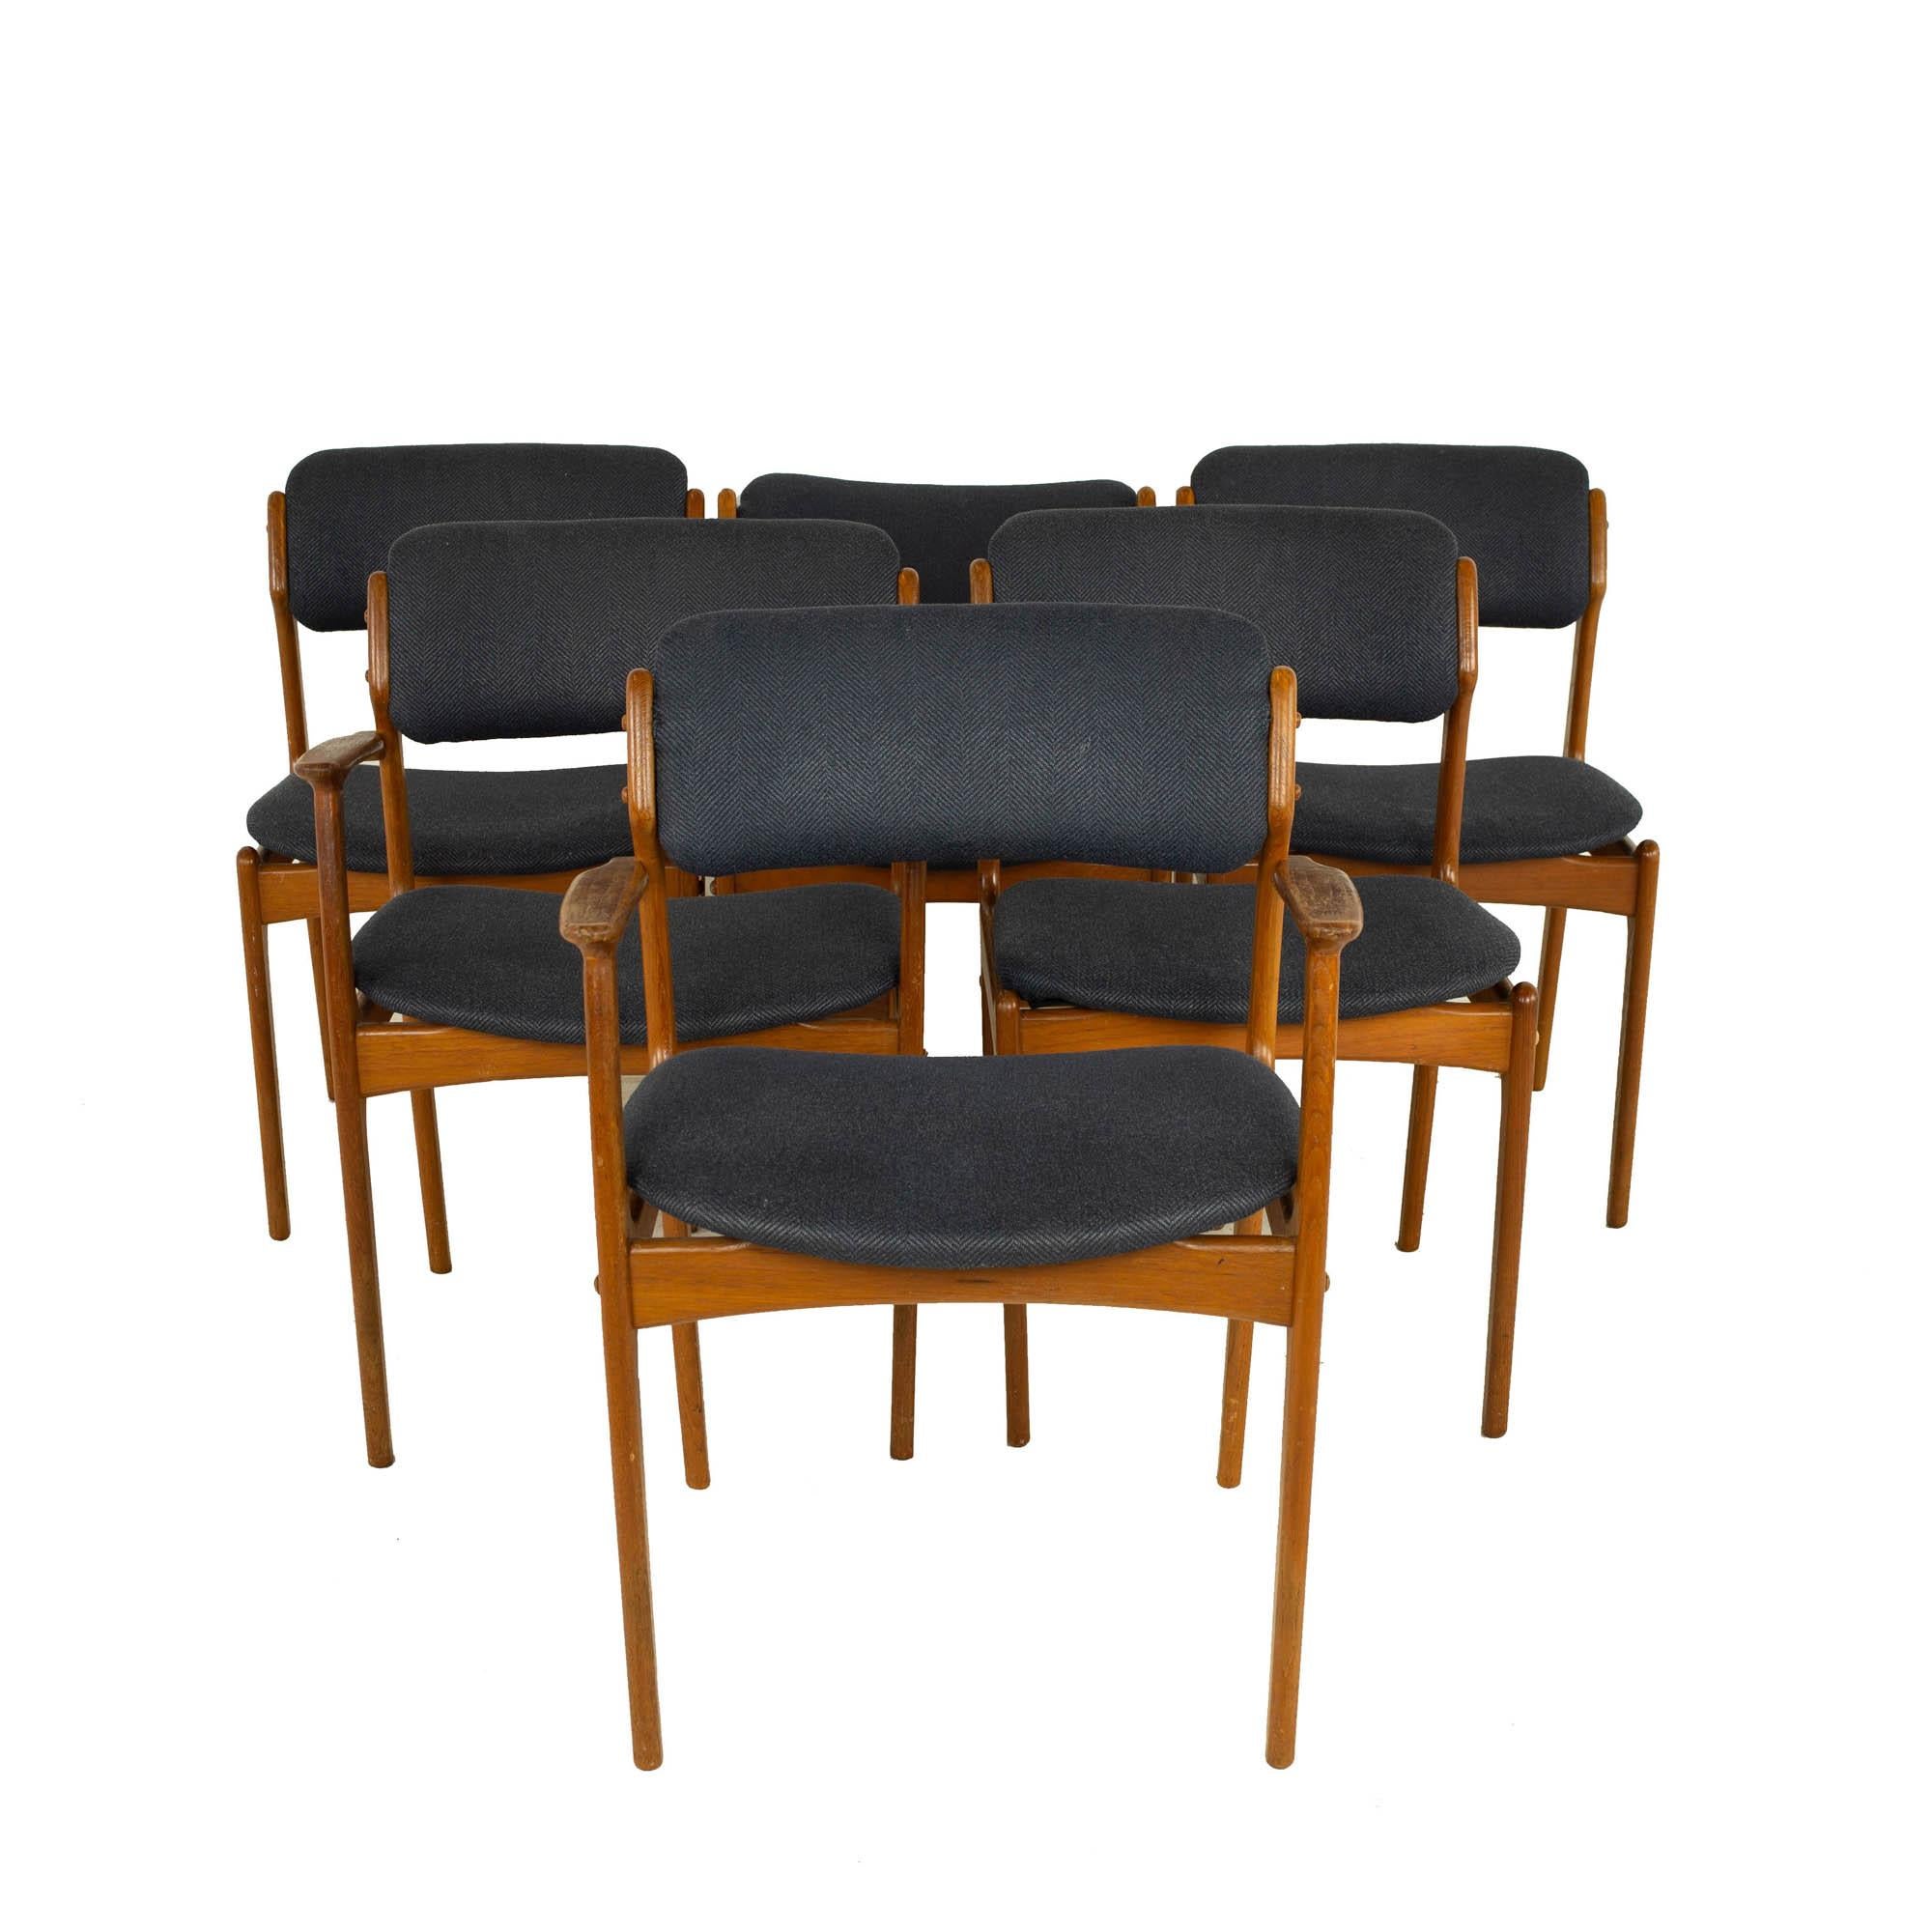 Erik Buch mid century Danish teak dining chairs - set of 6 

Each chair measures: 24 wide x 23.5 deep x 31 high, with a seat height of 18 inches and arm height/chair clearance of 21.5 inches 

?All pieces of furniture can be had in what we call